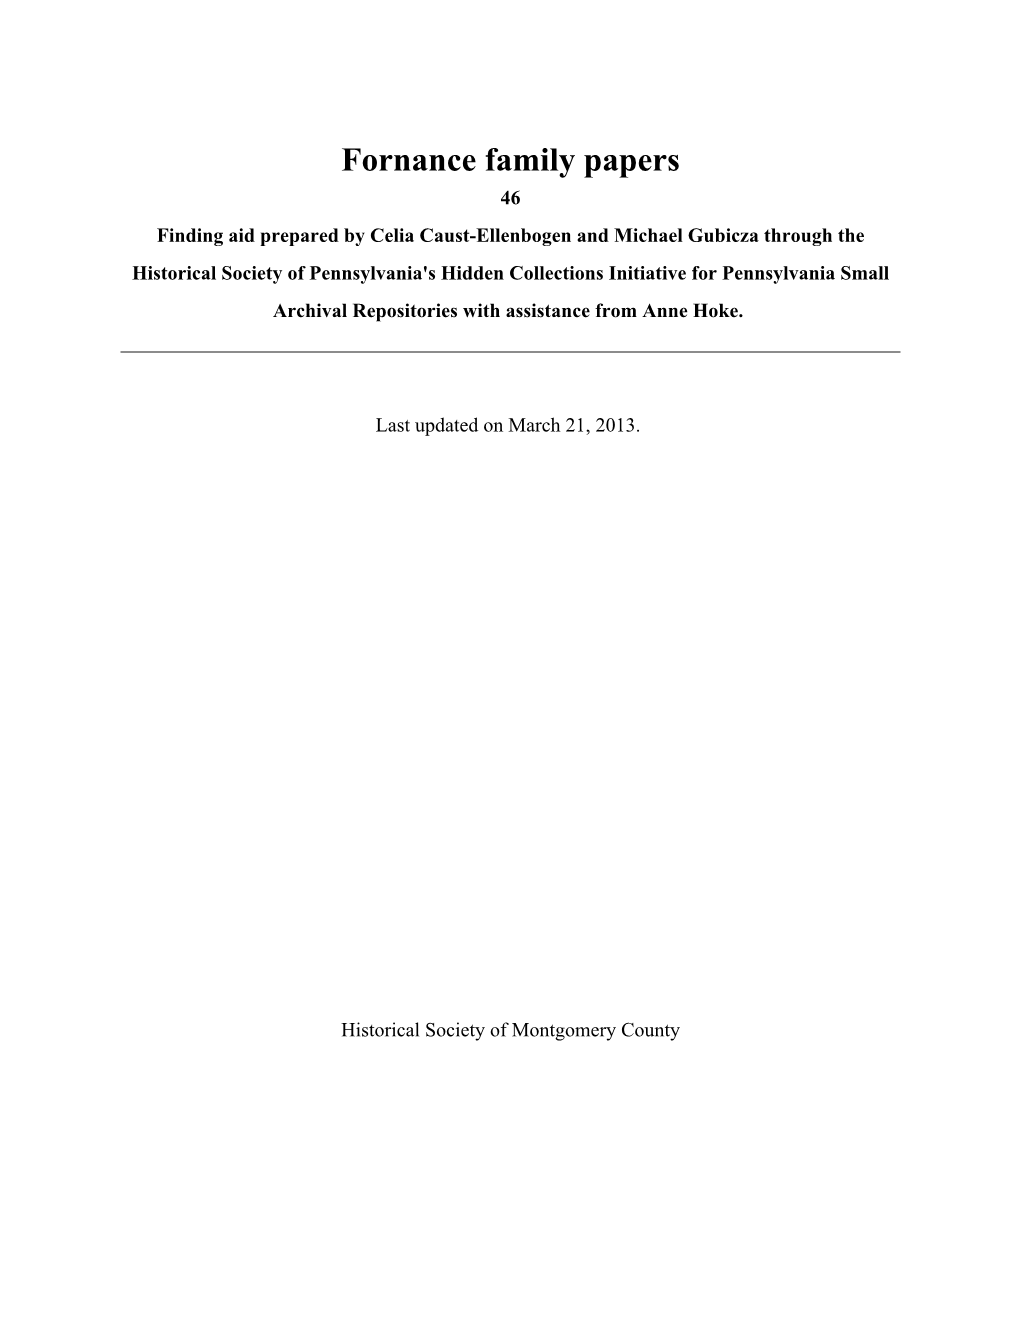 Fornance Family Papers